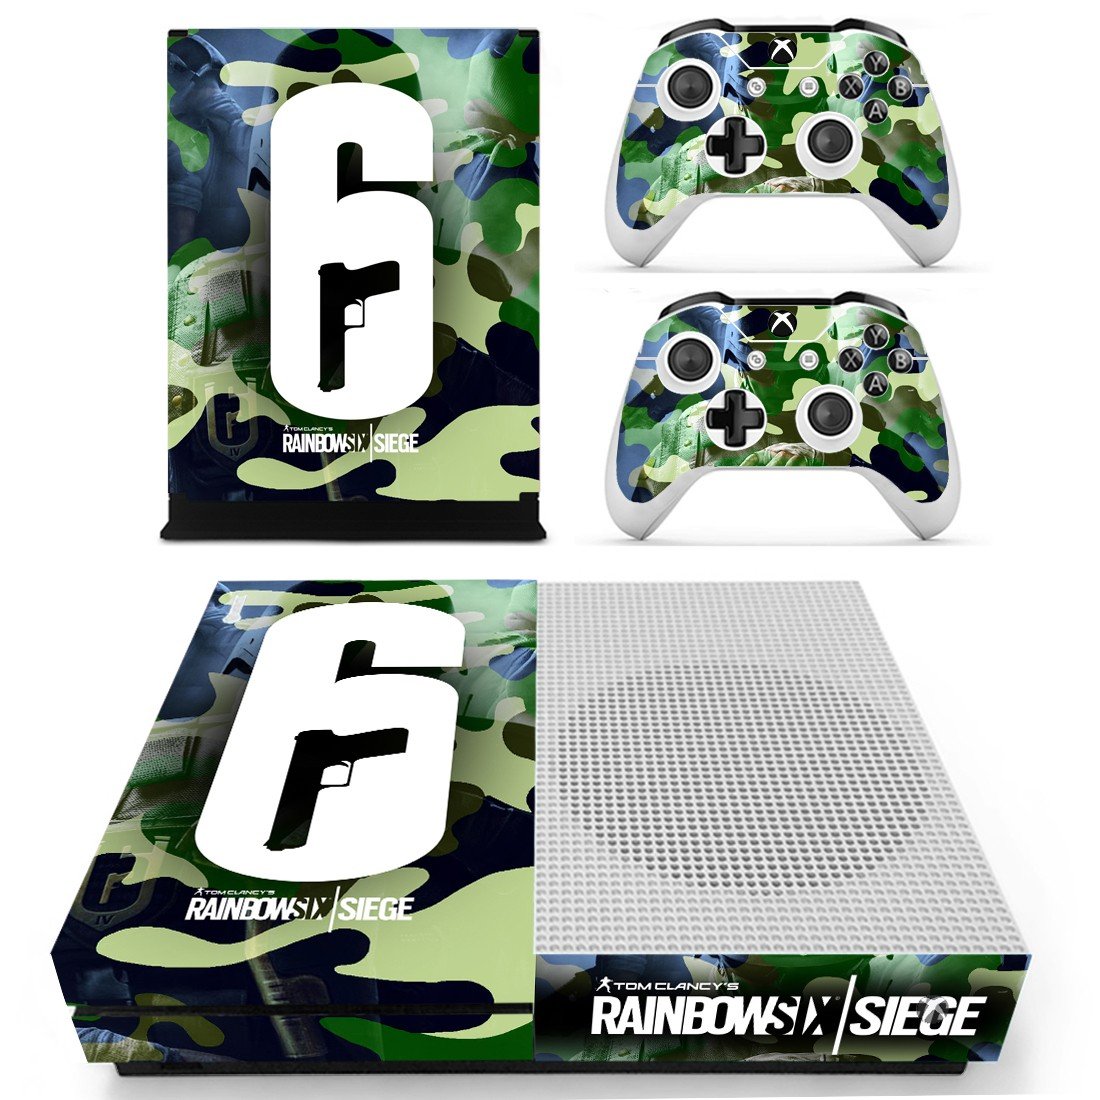 Xbox One S And Controllers Skin Sticker - Rainbow Six Siege